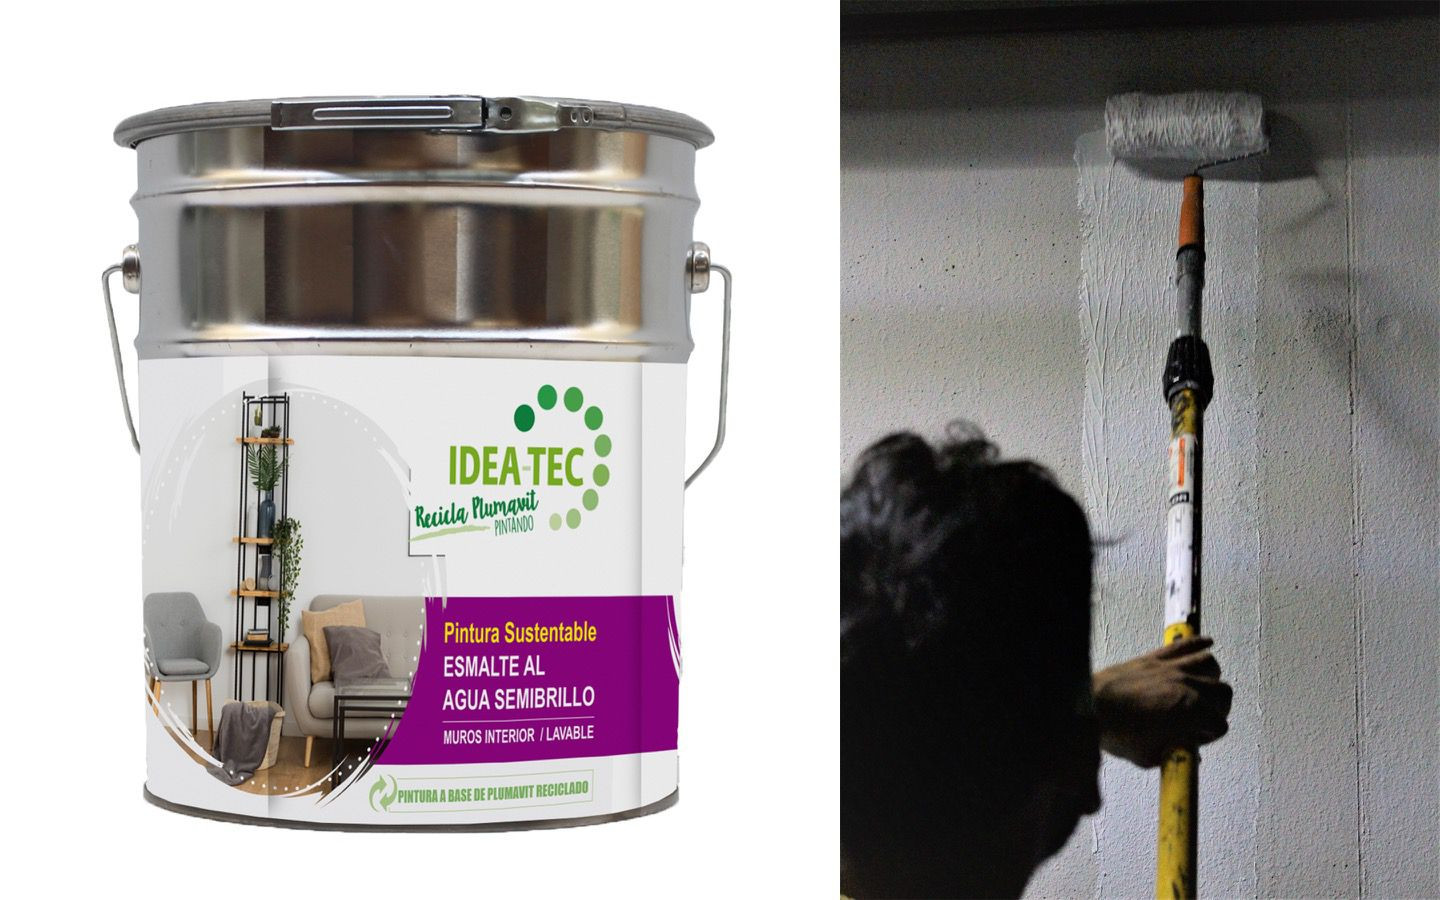 Idea-Tec: Paints made with EPS